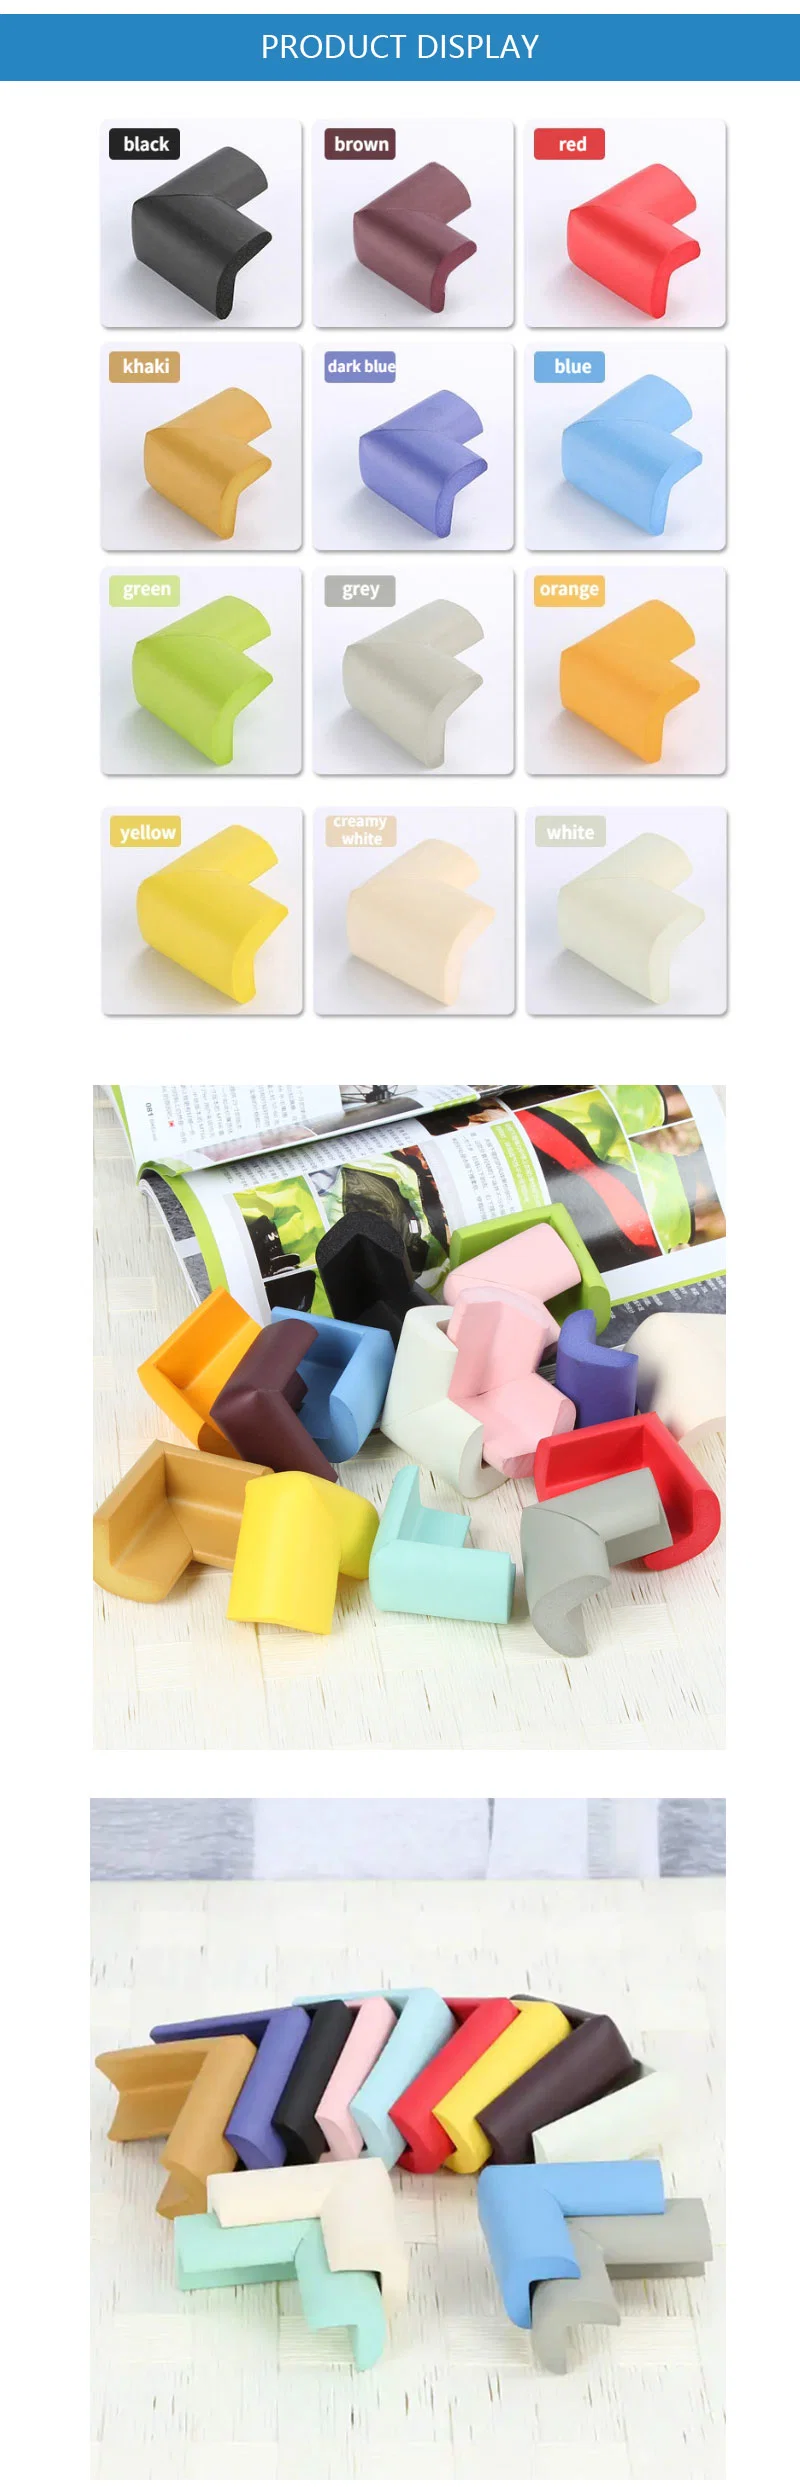 Baby Safety Products Rubber Foam Corner Protectors for Kids Safety